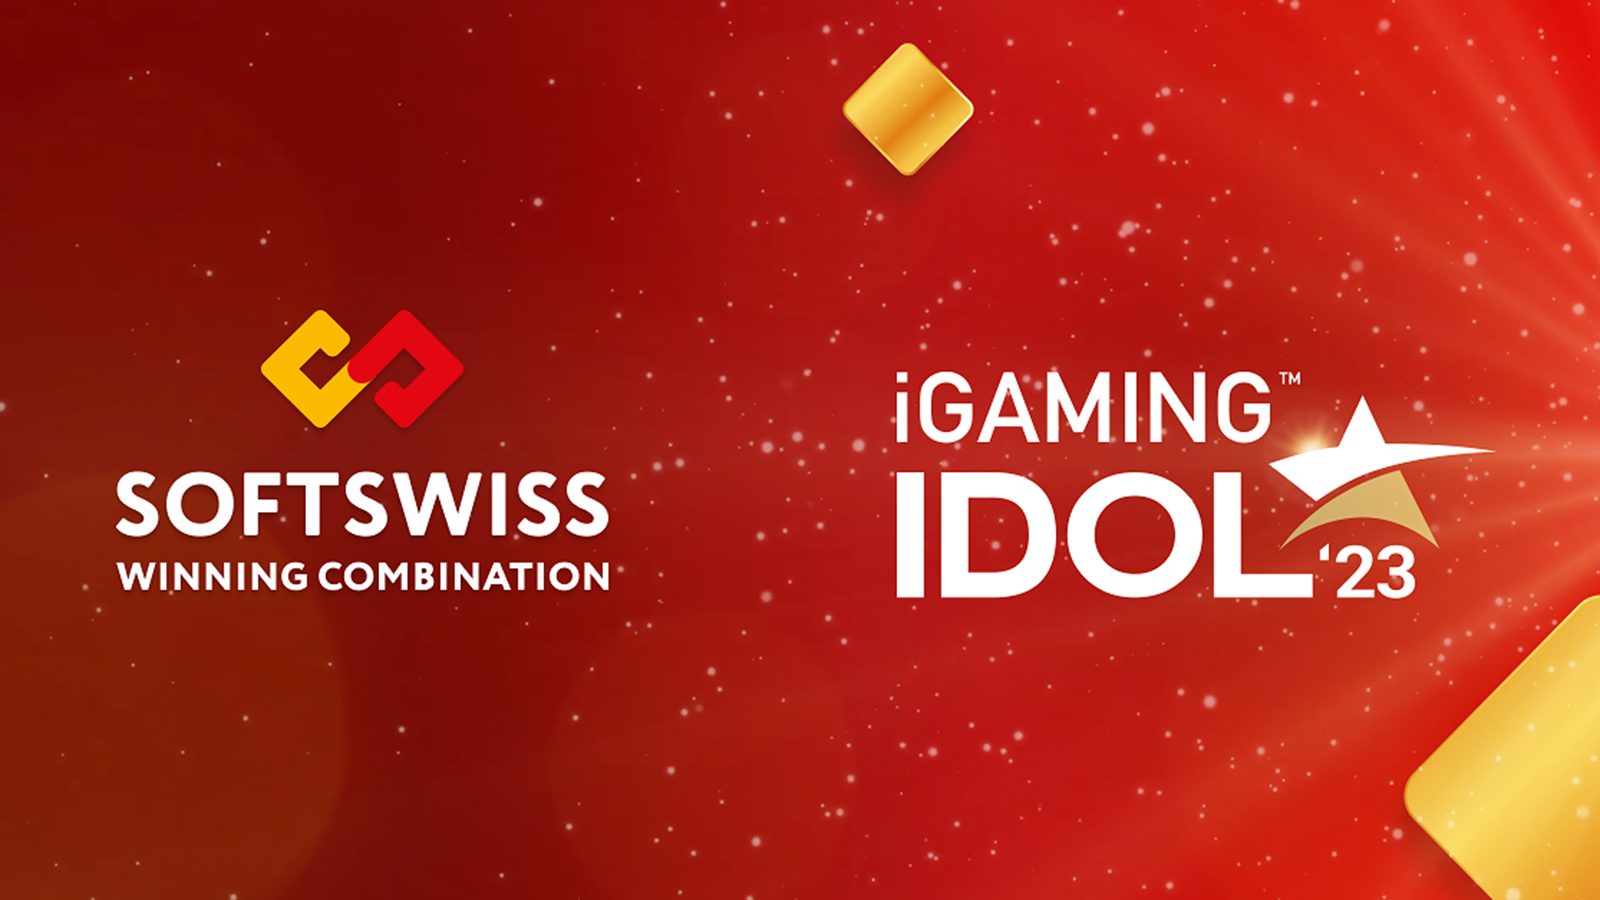 SOFTSWISS Wins Big in iGaming